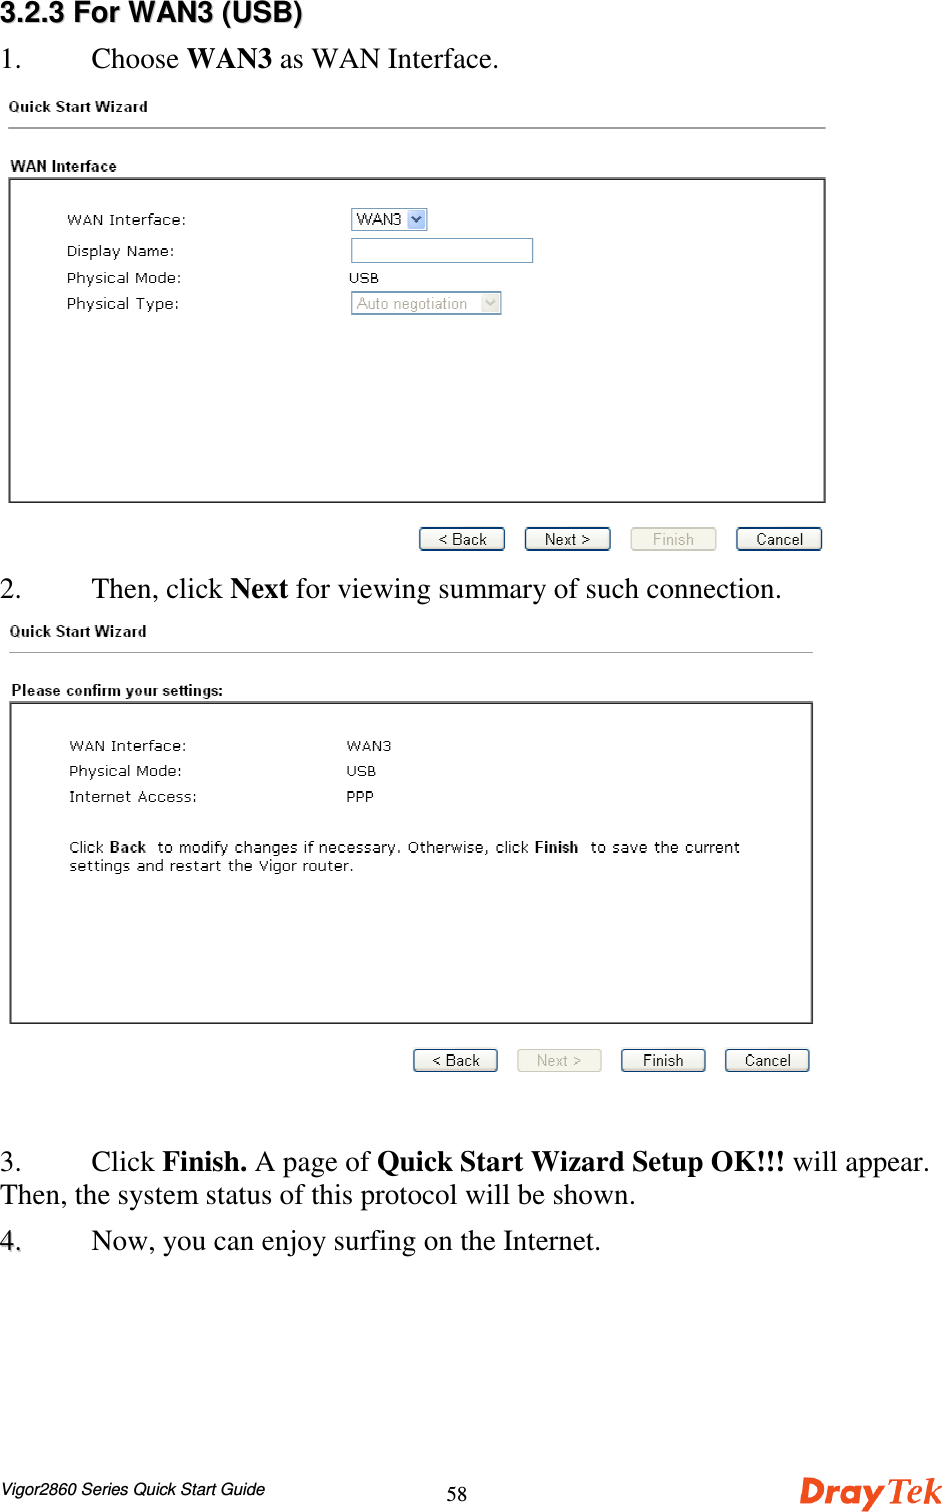 Vigor2860 Series Quick Start Guide5833..22..33  FFoorr  WWAANN33  ((UUSSBB))1. Choose WAN3 as WAN Interface.2. Then, click Next for viewing summary of such connection.3. Click Finish. A page of Quick Start Wizard Setup OK!!! will appear.Then, the system status of this protocol will be shown.44..  Now, you can enjoy surfing on the Internet.